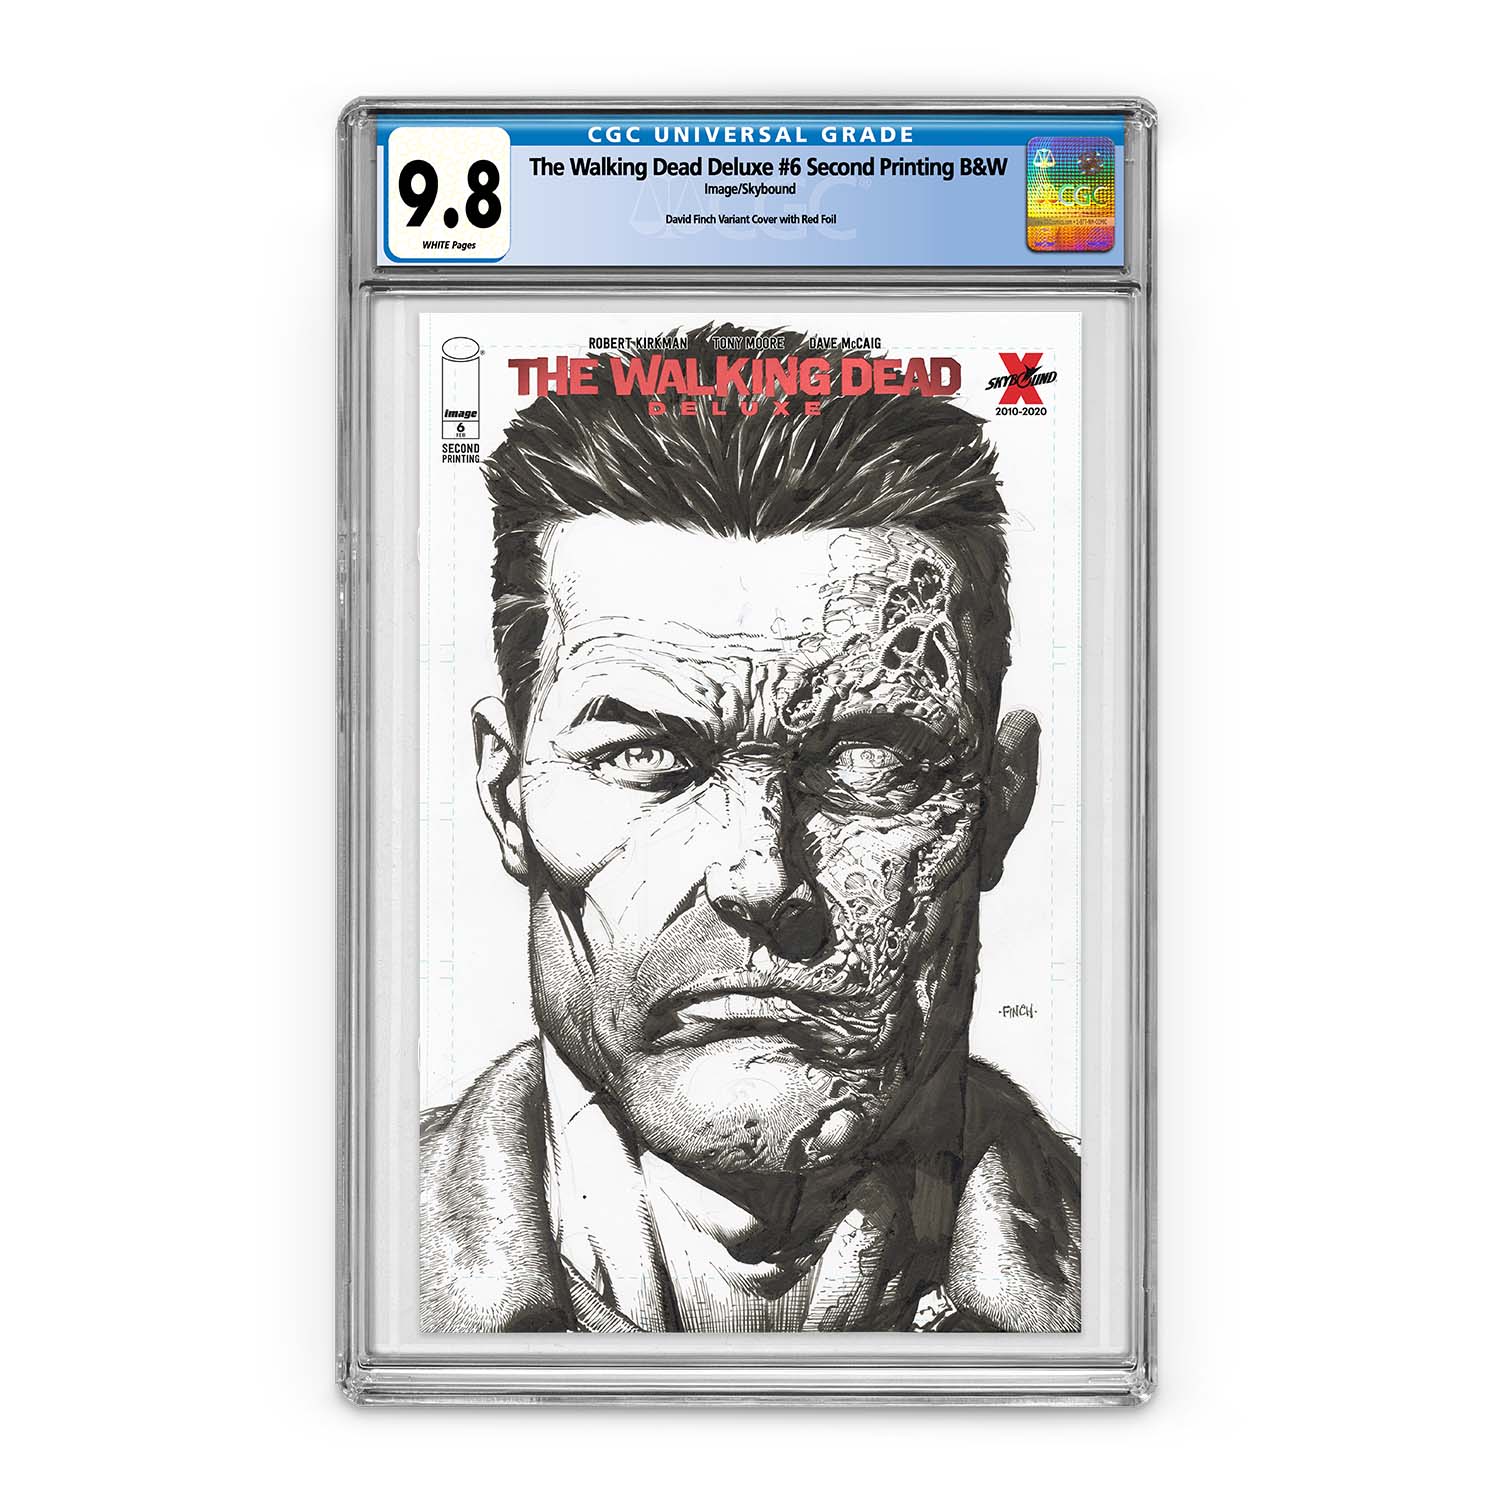 The Walking Dead Deluxe #6 Second Printing B&W with Red Foil Logo - CGC 9.8